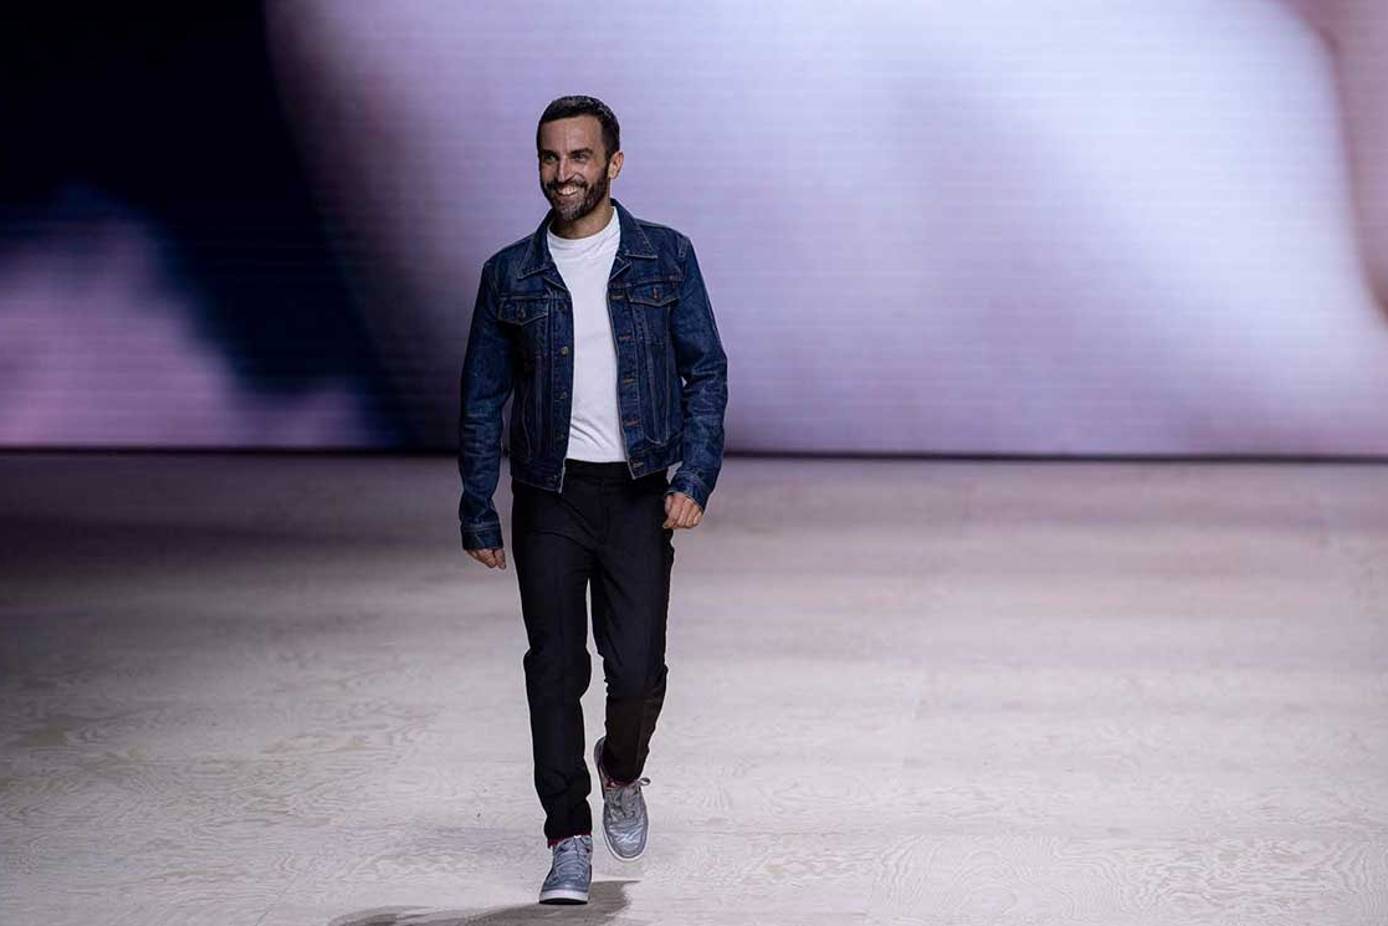 Nicolas Ghesquière Distances Himself from Trump After Texas Event